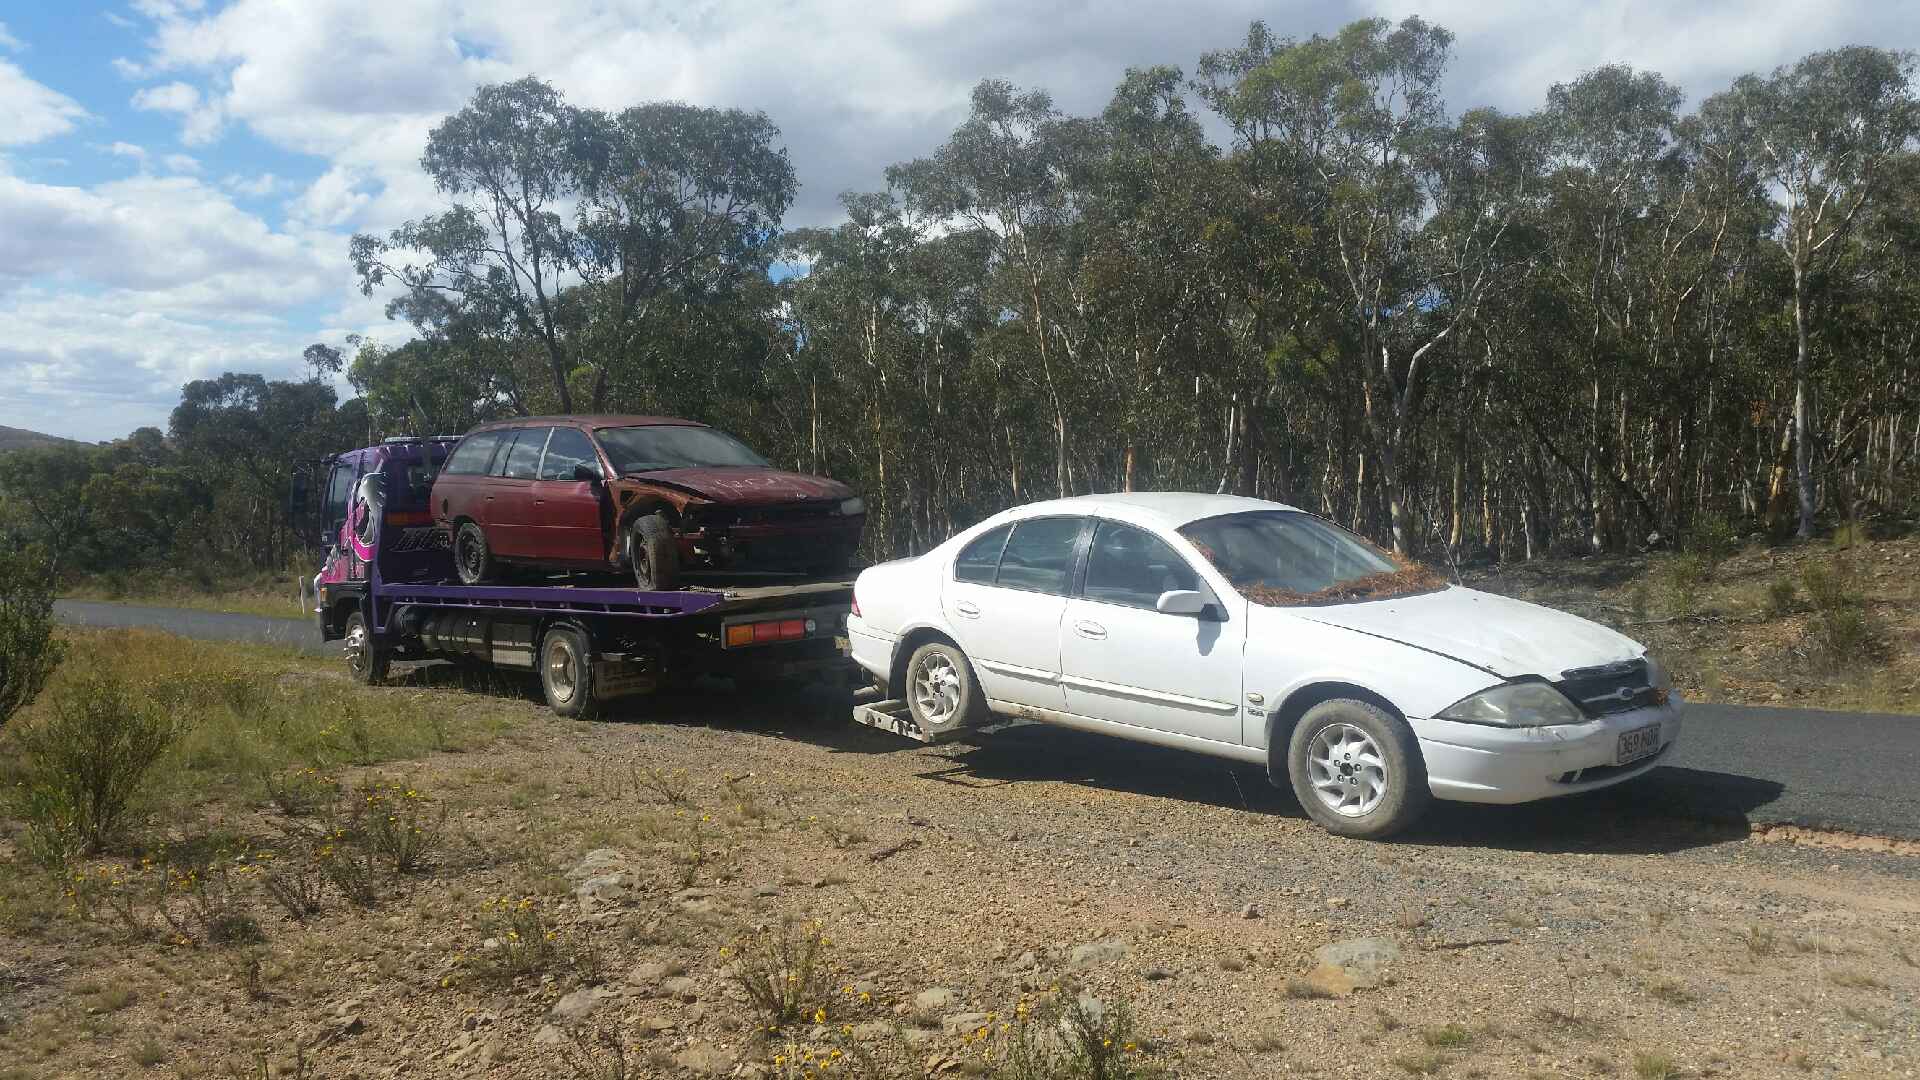 Car Wreckers Canberra